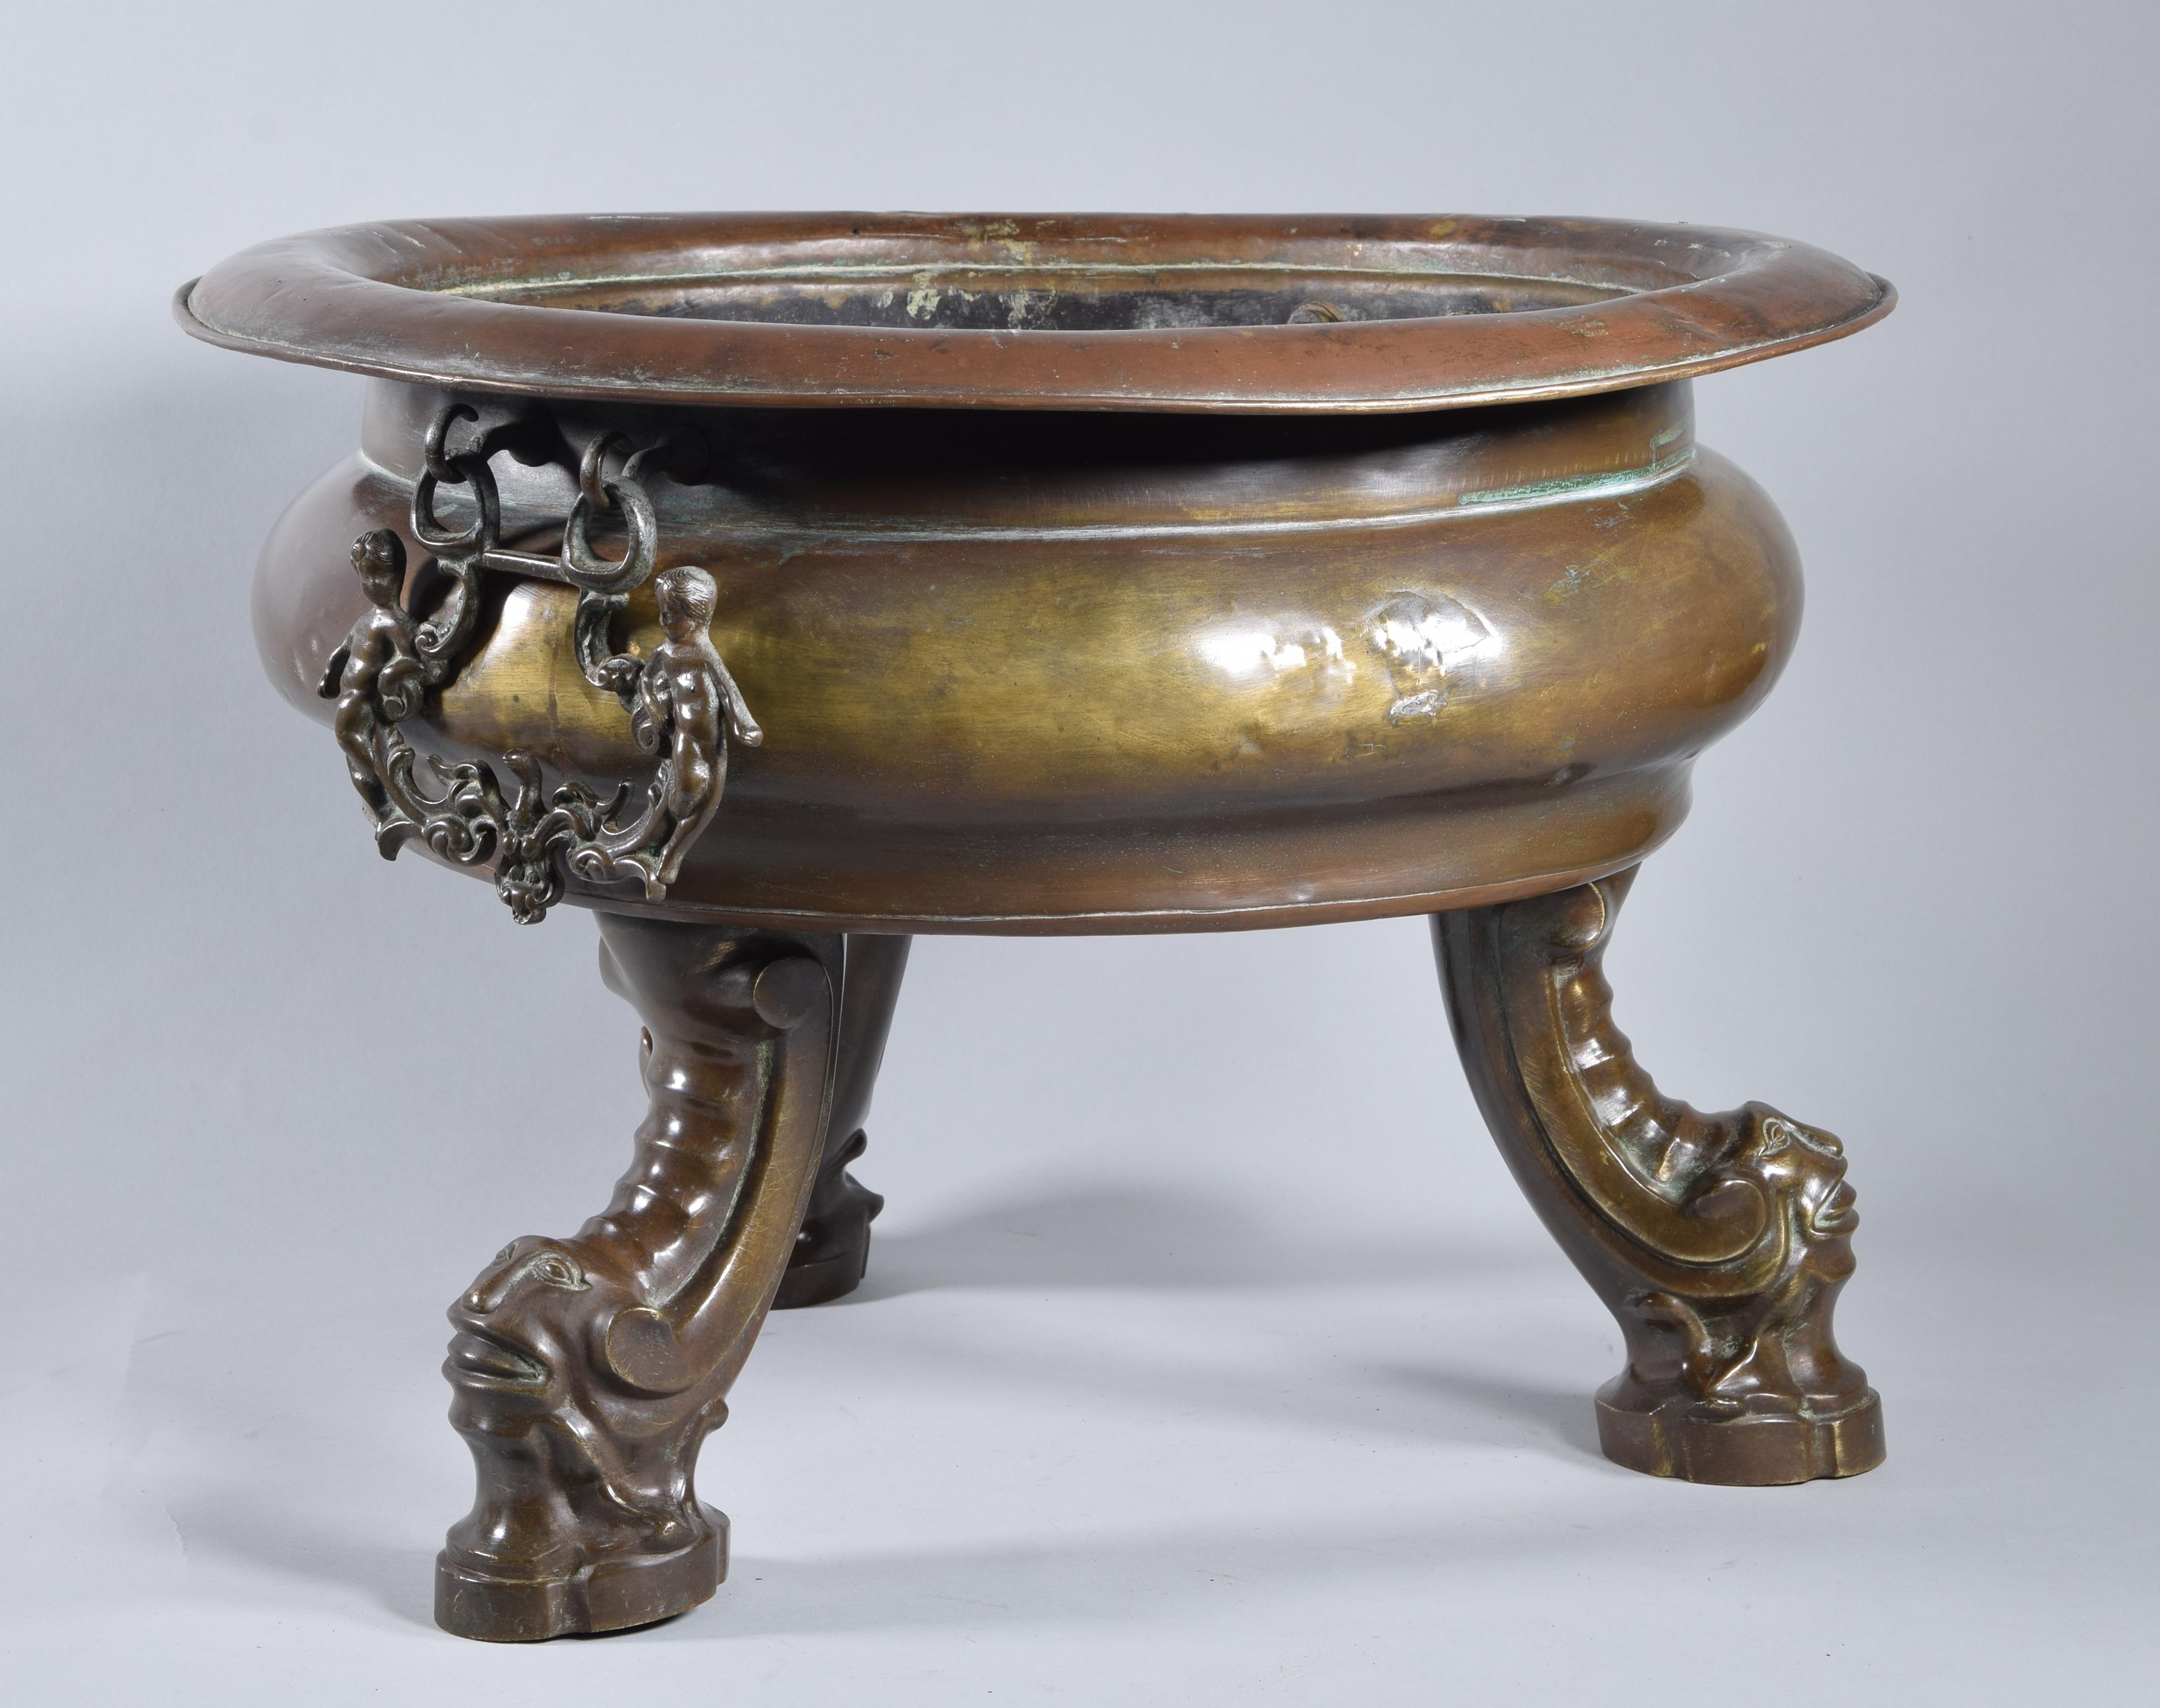 Spanish bronze baroque brazier, raised on three legs in the form of curly scroll to the outside, topped with grotesque masks of synthetic features. The container is flattened and staggered, with a clear cut separating the neck from the belly and an